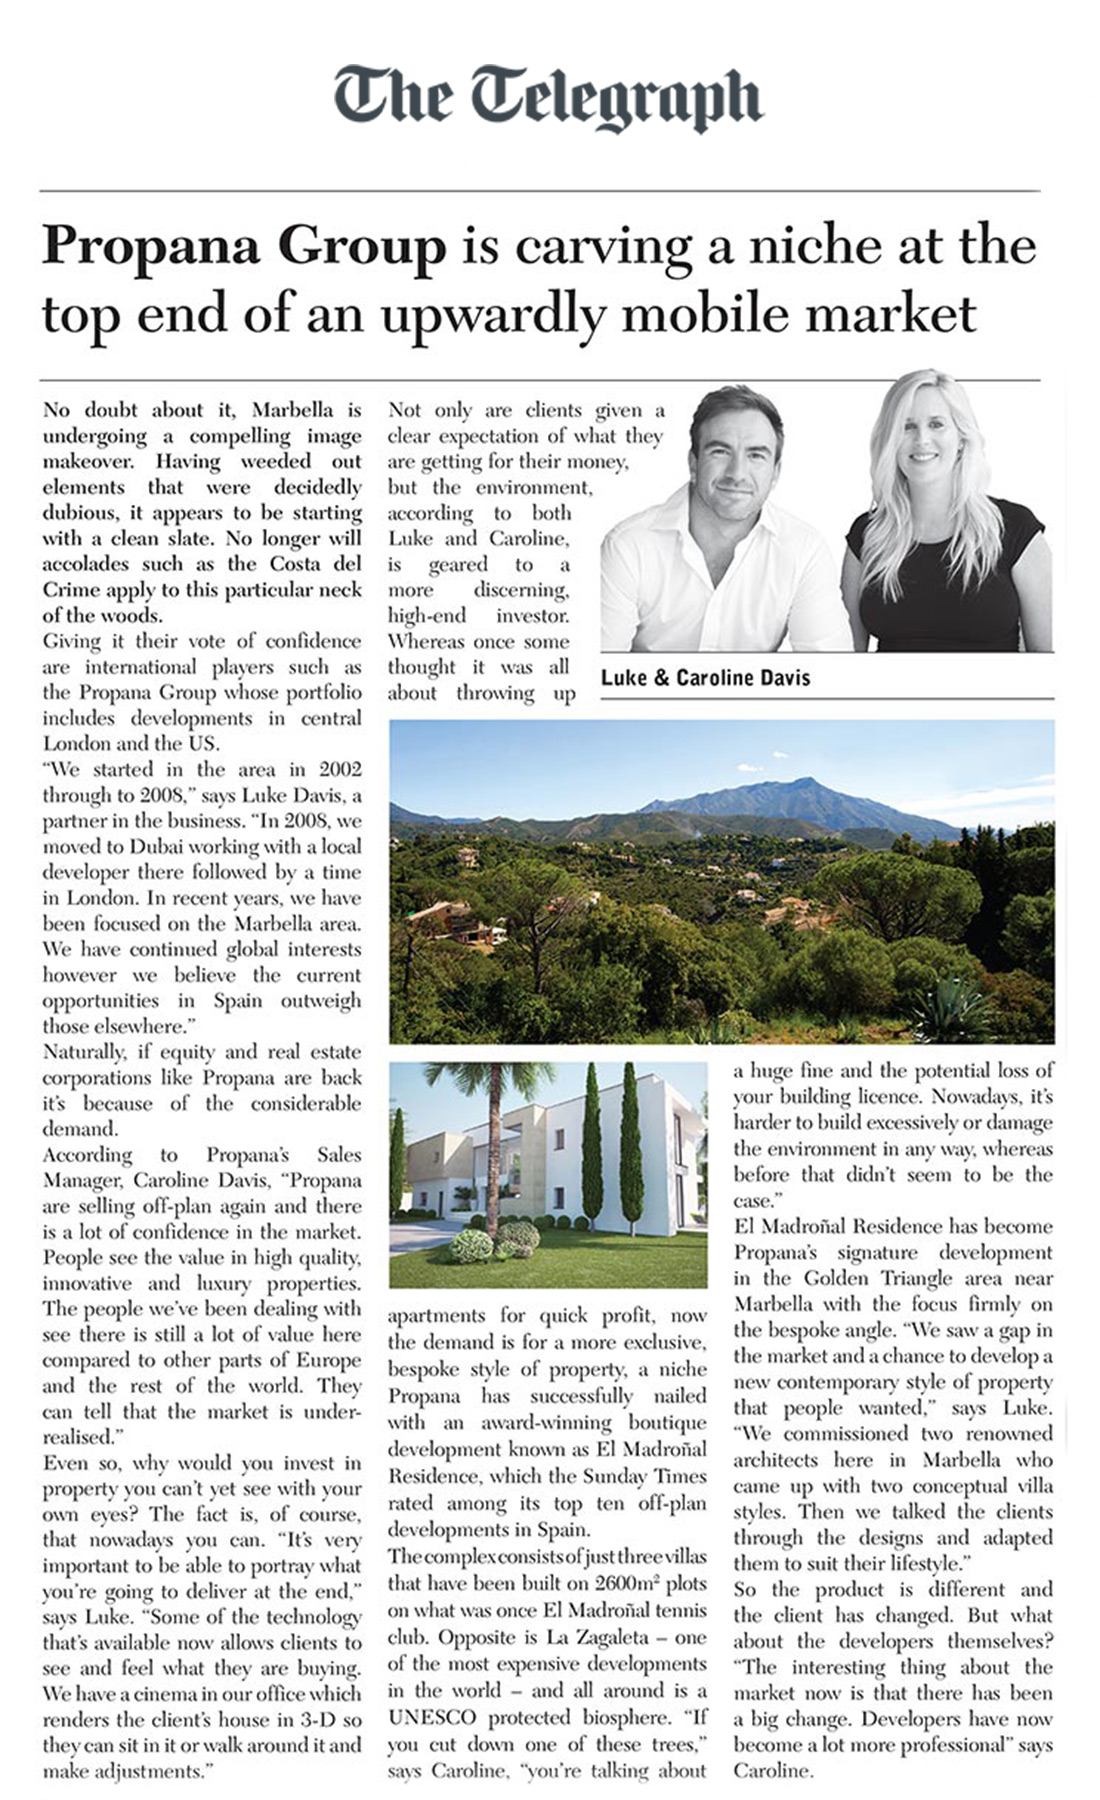 "Propana Group is carving a niche at the top end of an upwardly mobile market" - The Daily Telegraph (July 2016)